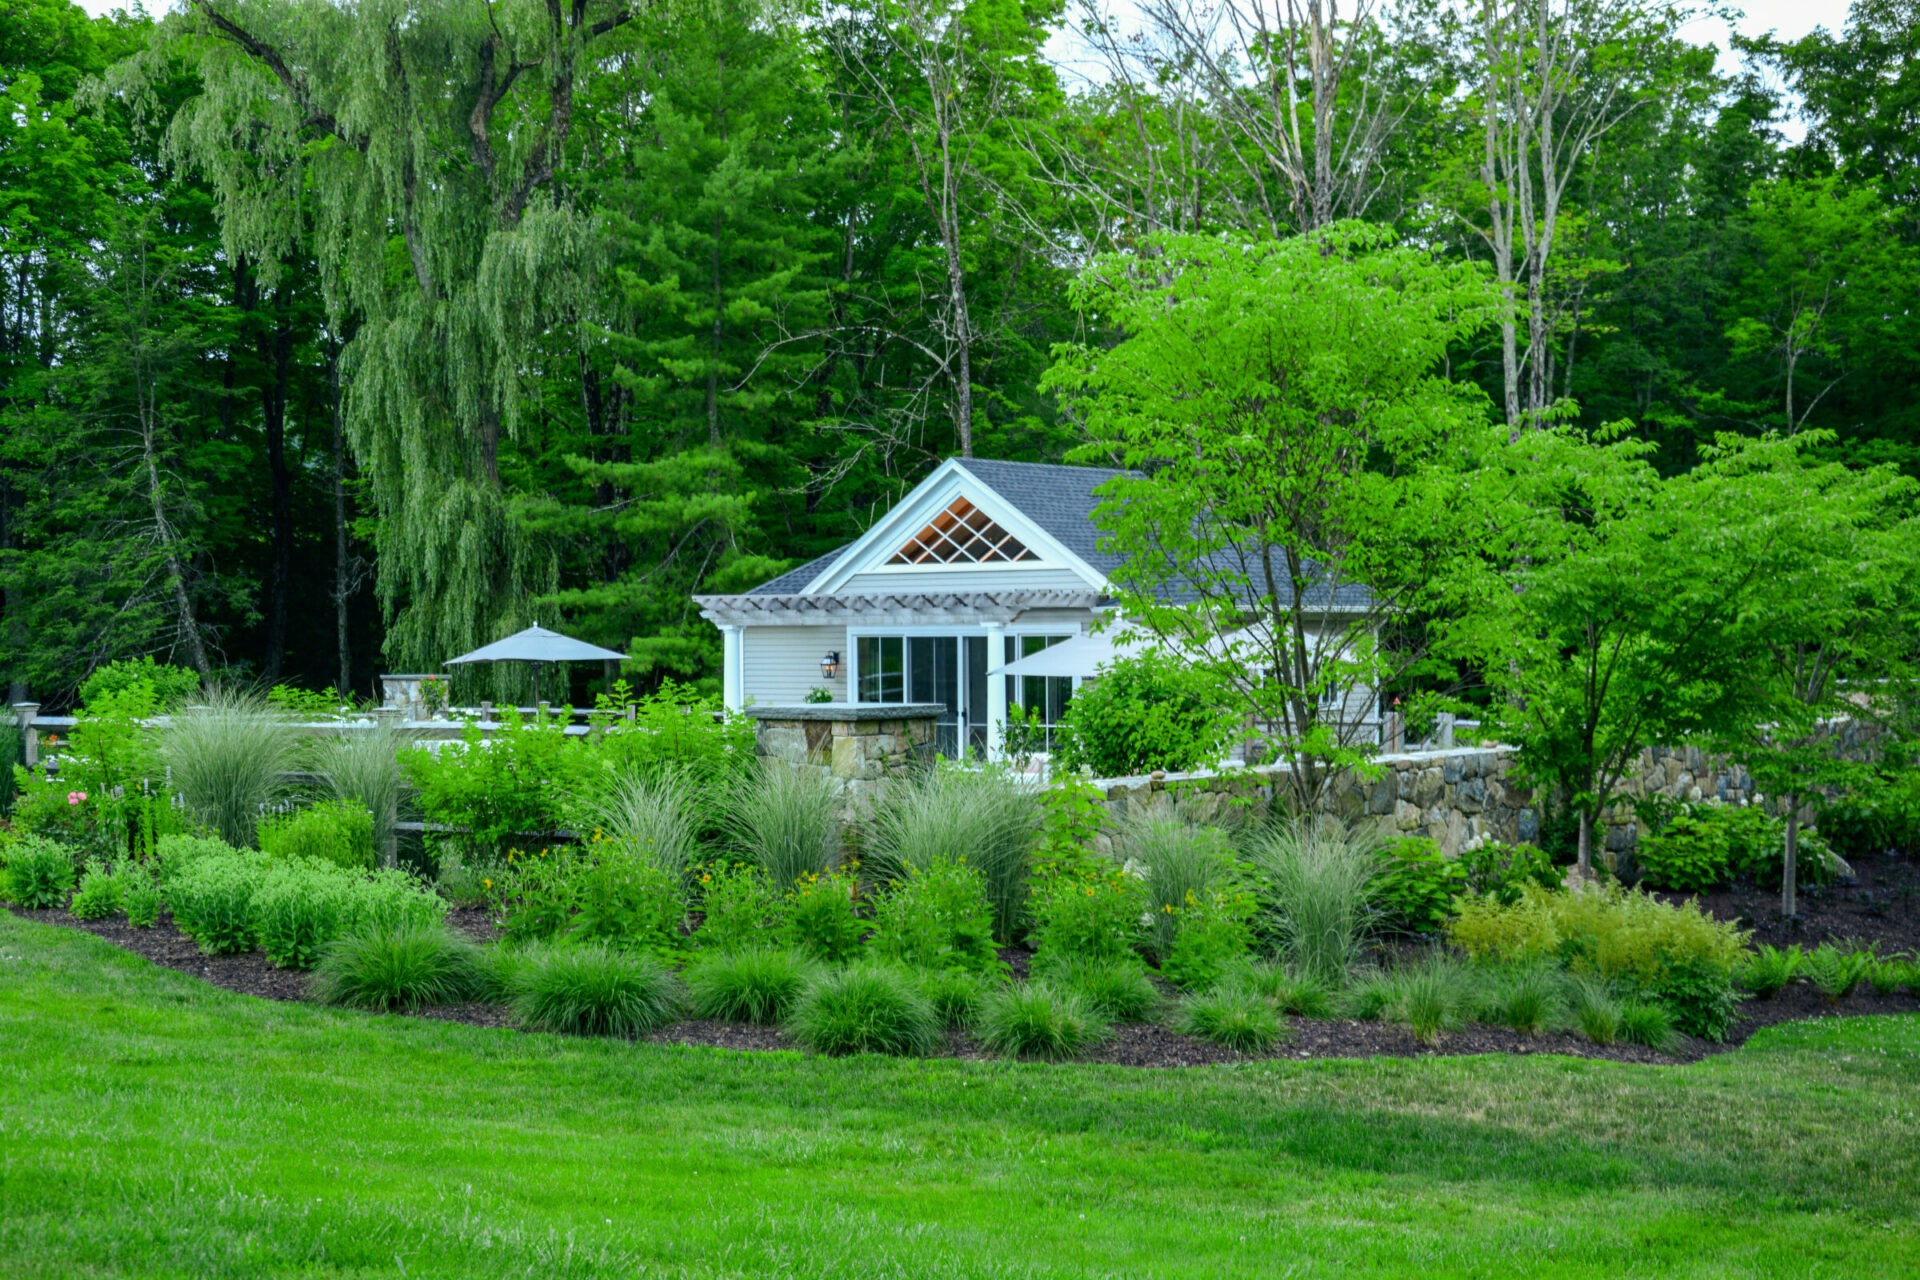 A quaint white building surrounded by lush greenery, trees, and neatly landscaped gardens, with an outdoor umbrella visible in the background.